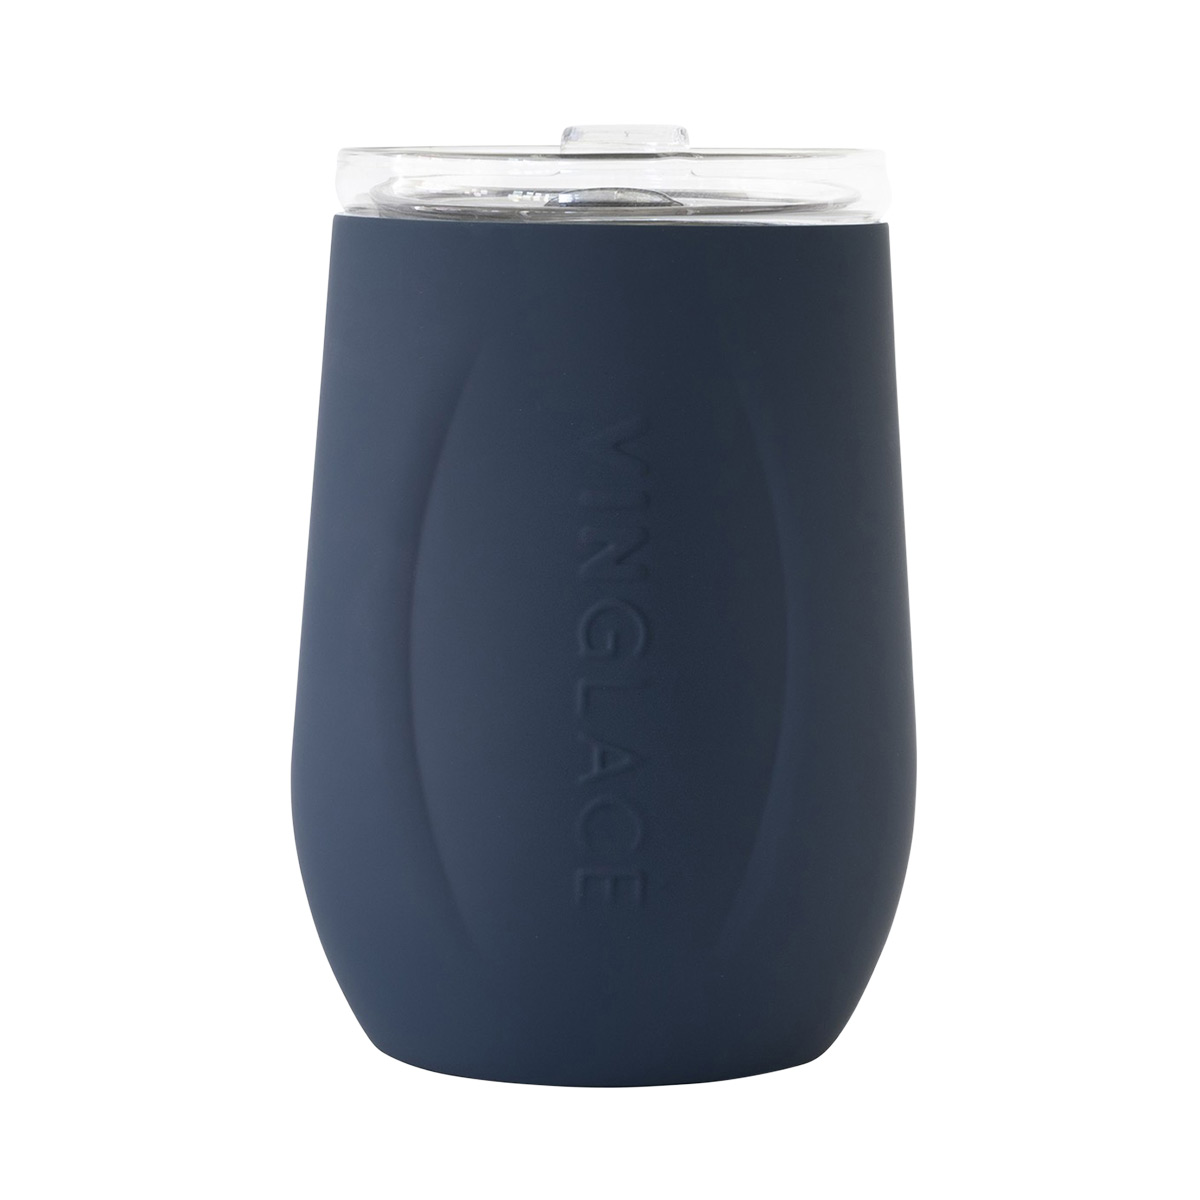 https://www.containerstore.com/catalogimages/487921/10095096-NAVY-WINE-WHITE-GROUNG-ven1.jpg